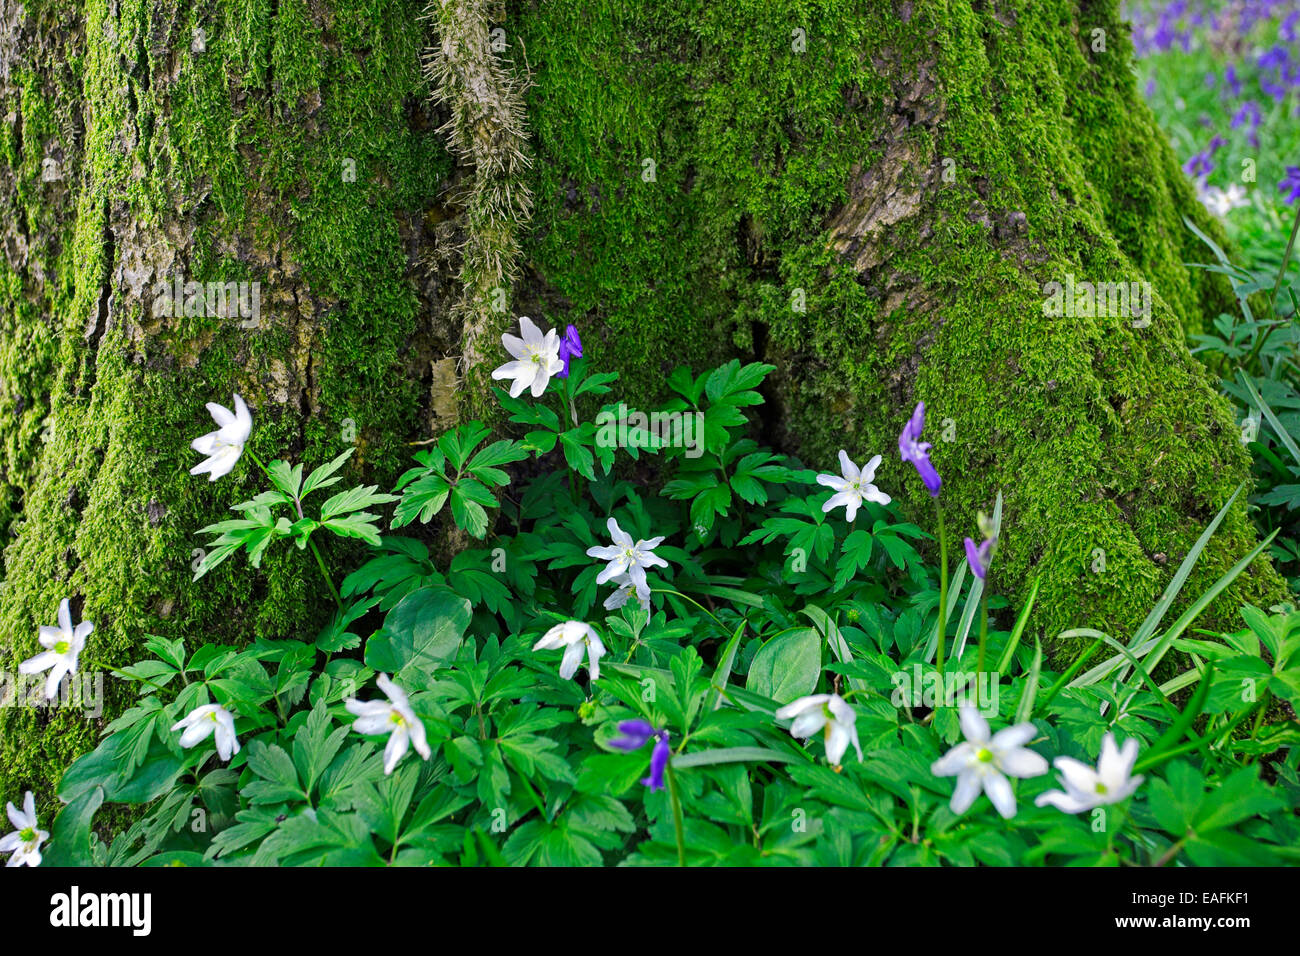 Wood Anemones and Bluebells growing on the forest floor. Stock Photo